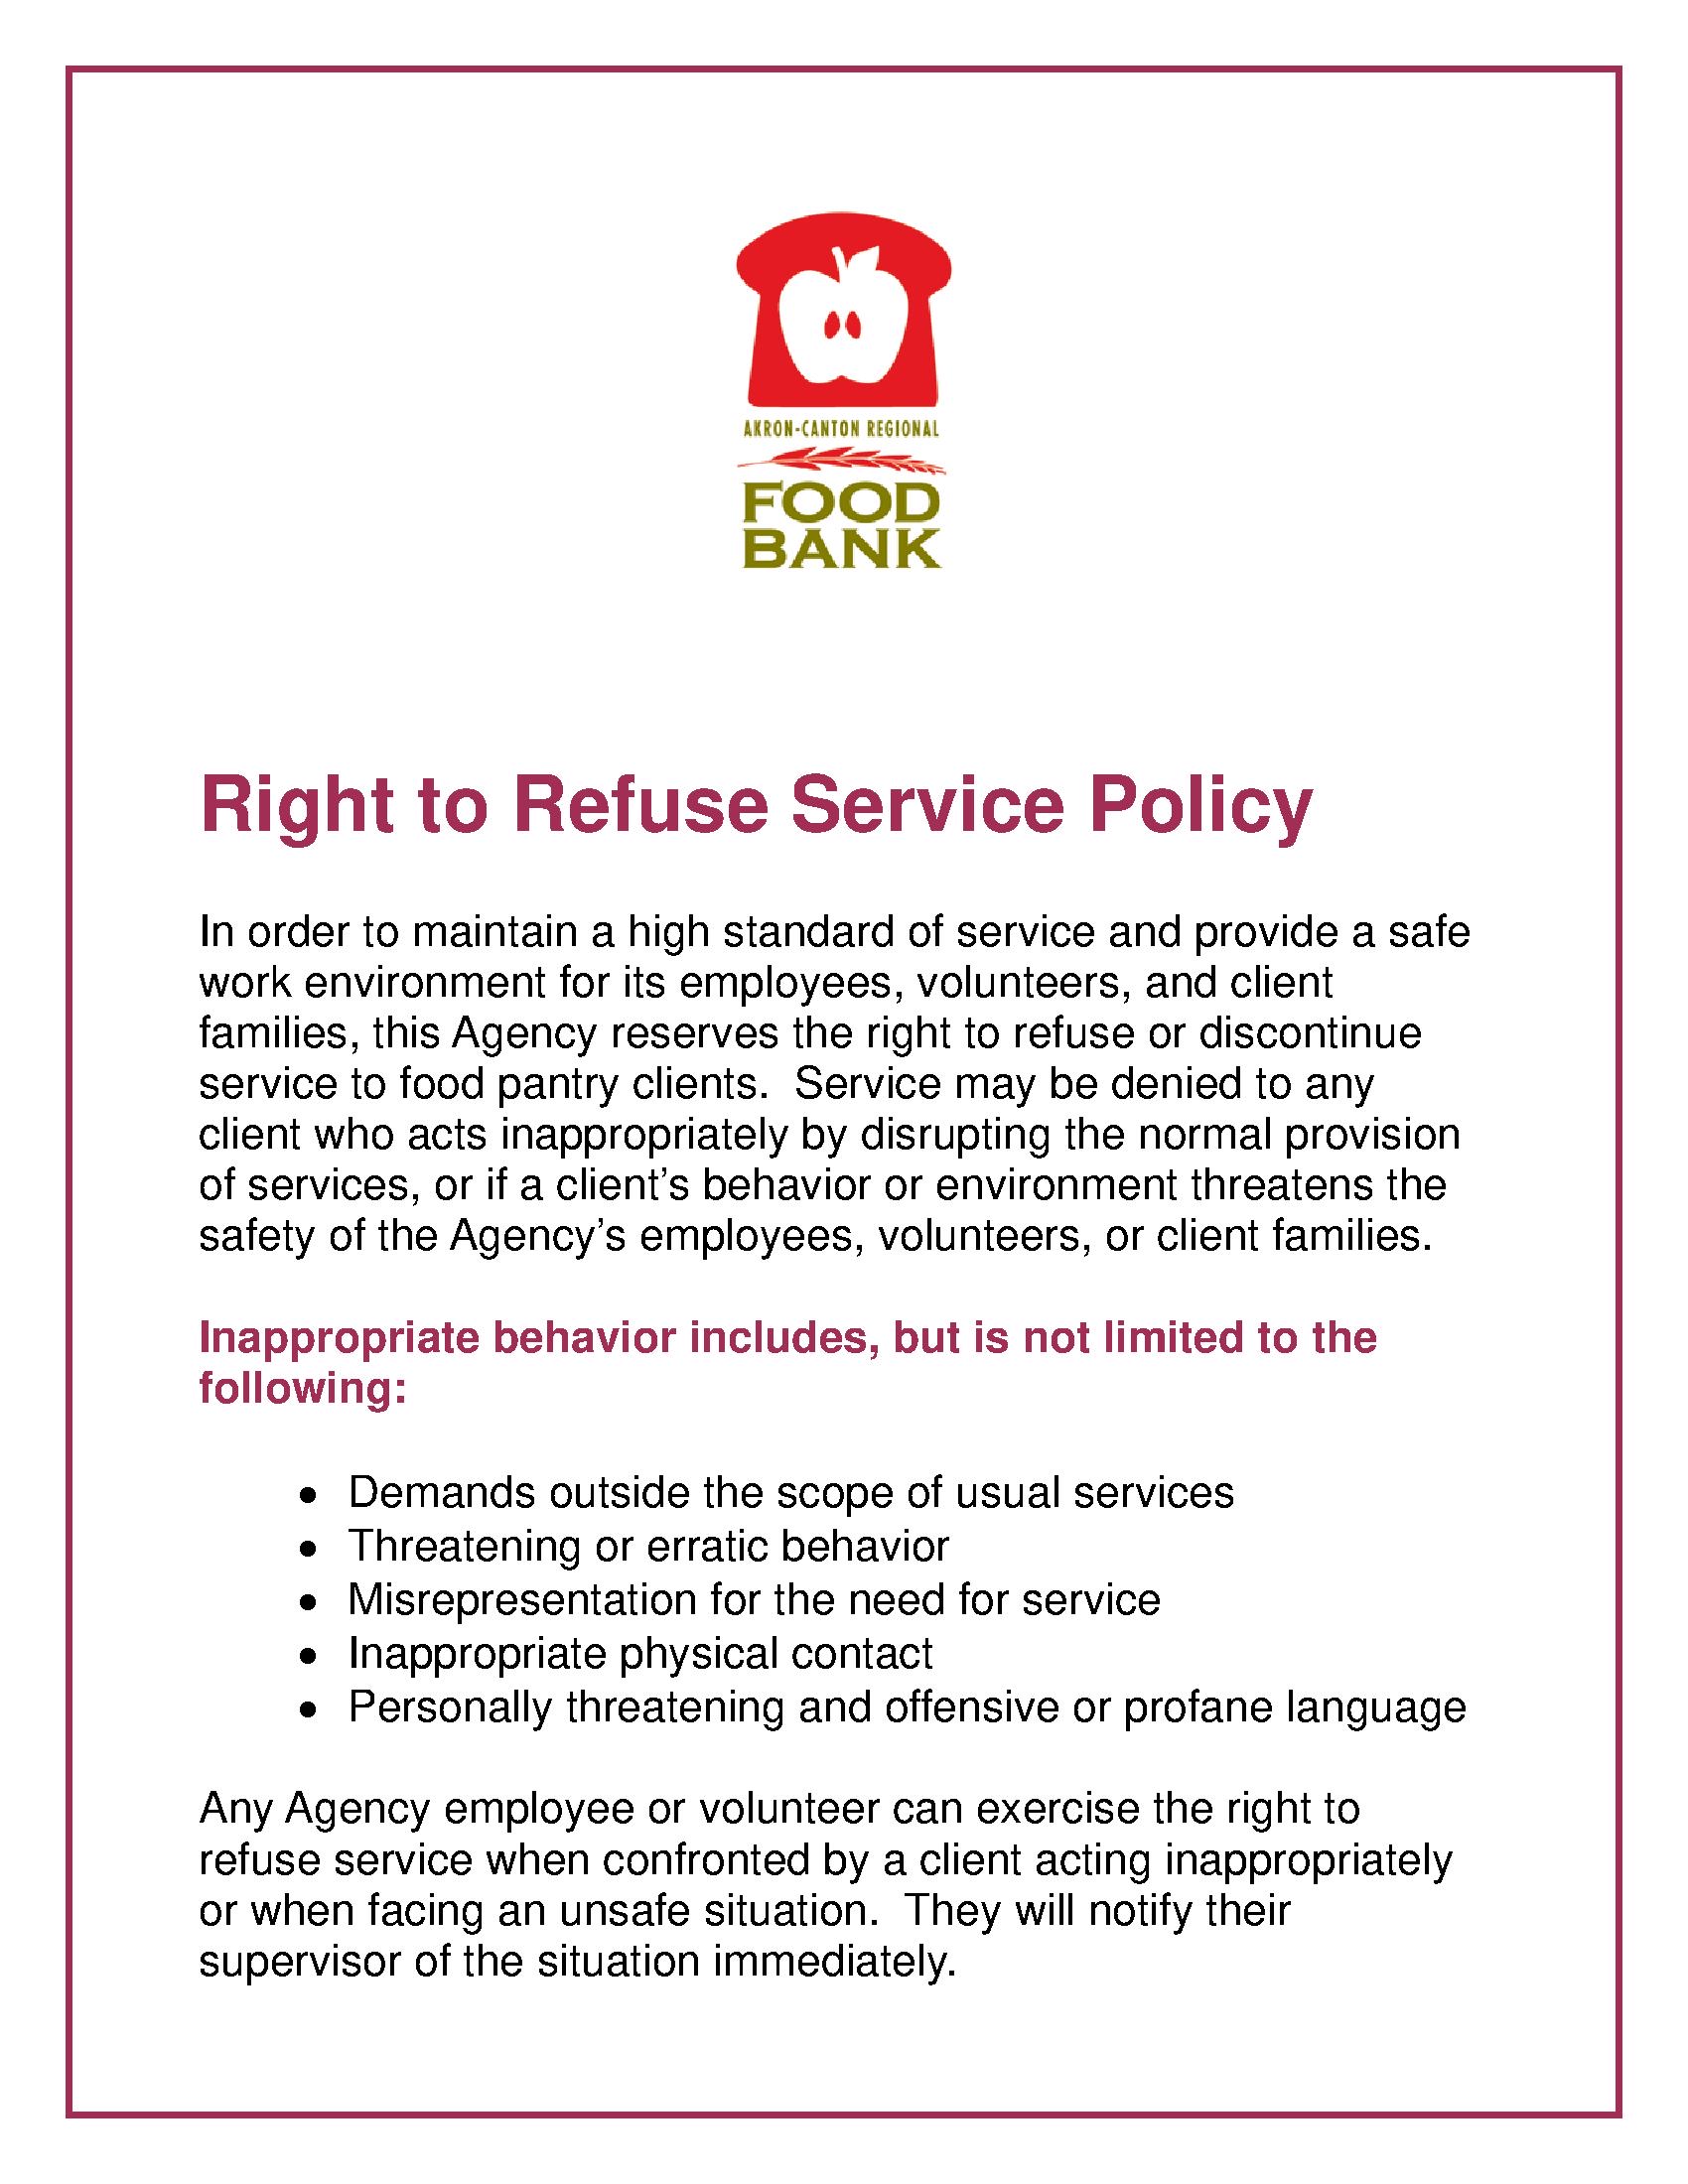 Right to Refuse Service Policy